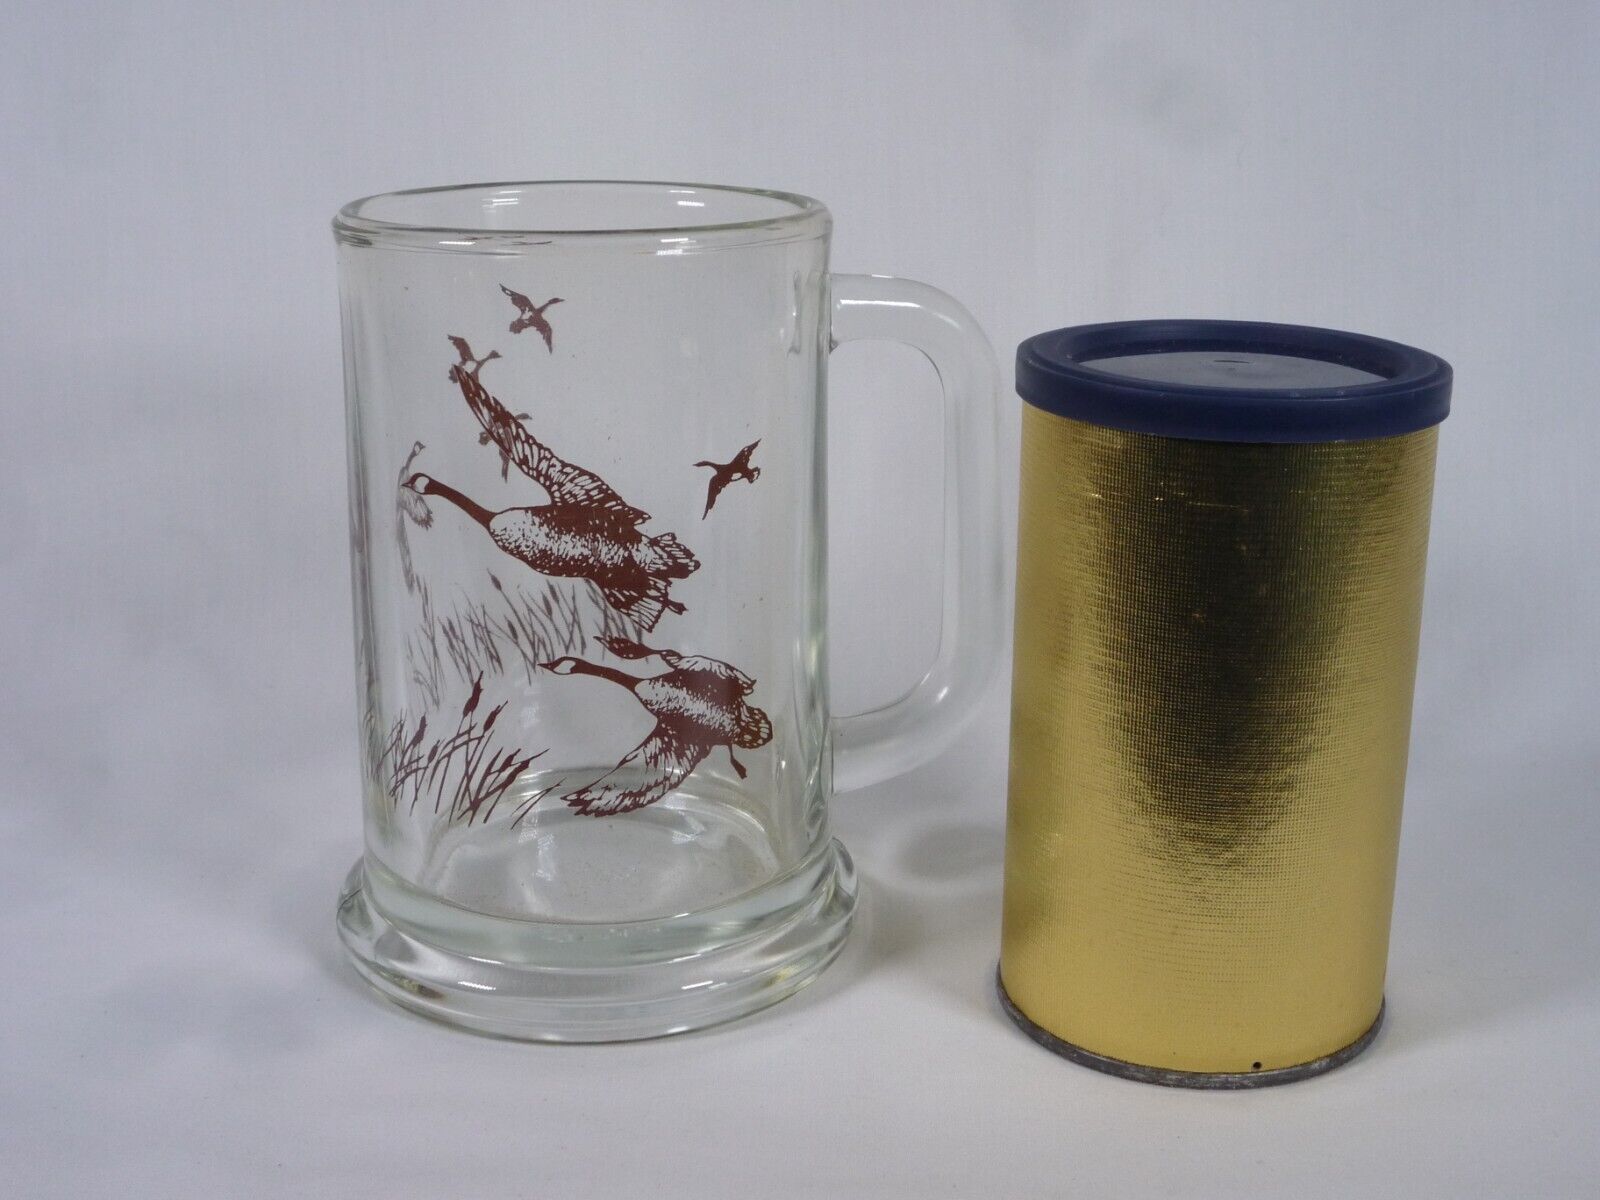 Vintage Avon 1982 THE PERFECT COMBO-Mug Decorated Geese, Grass & Gourmet Popcorn